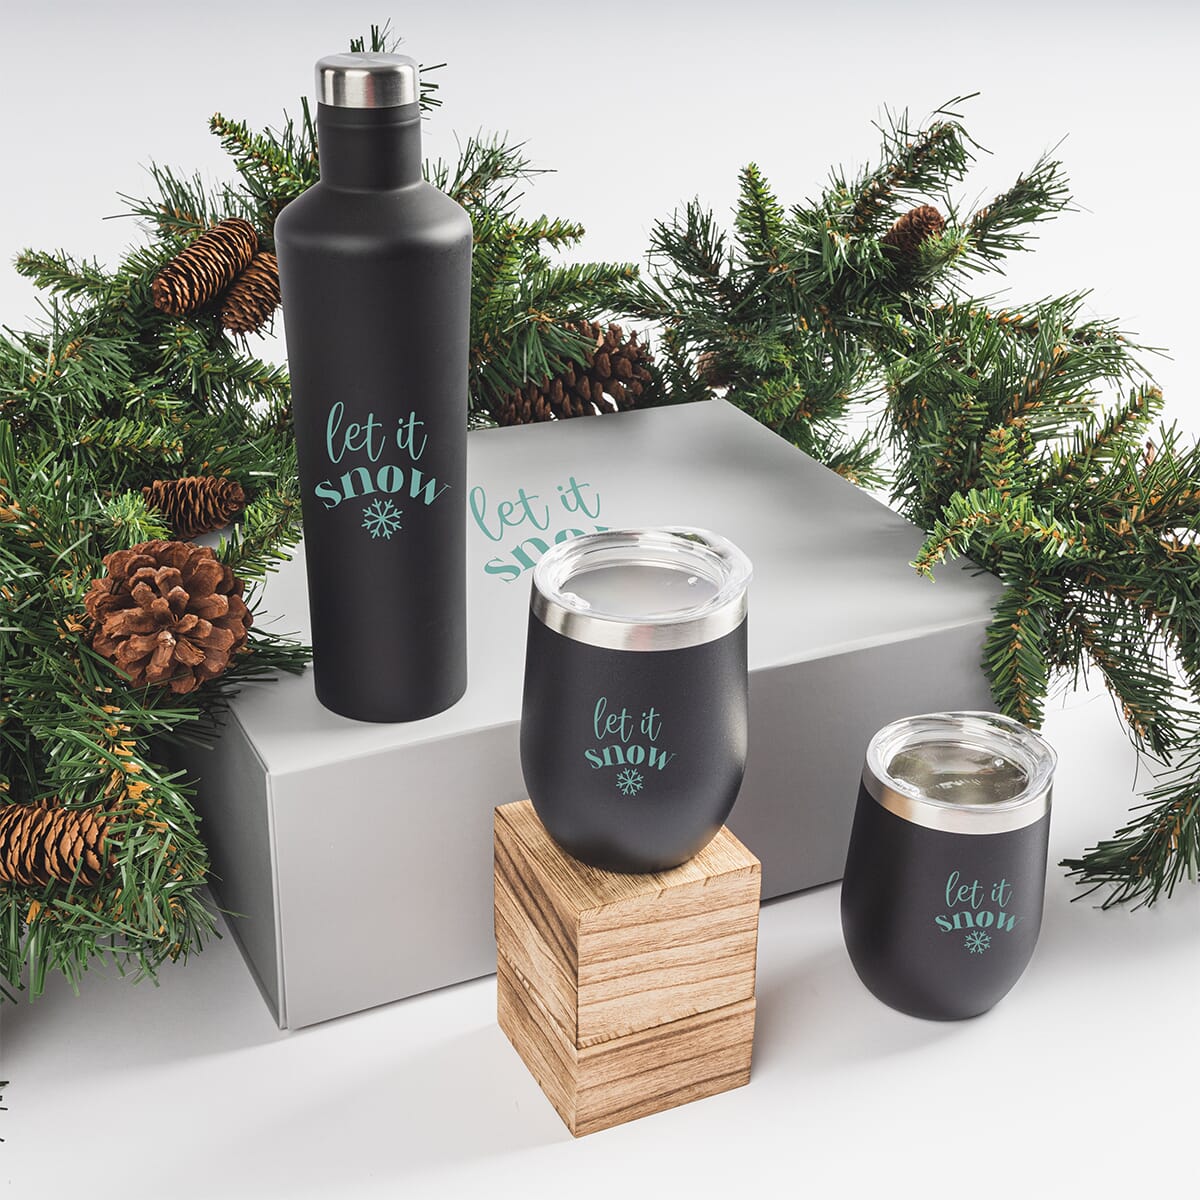 5 Creative Holiday Gifts for Your Employees This Year